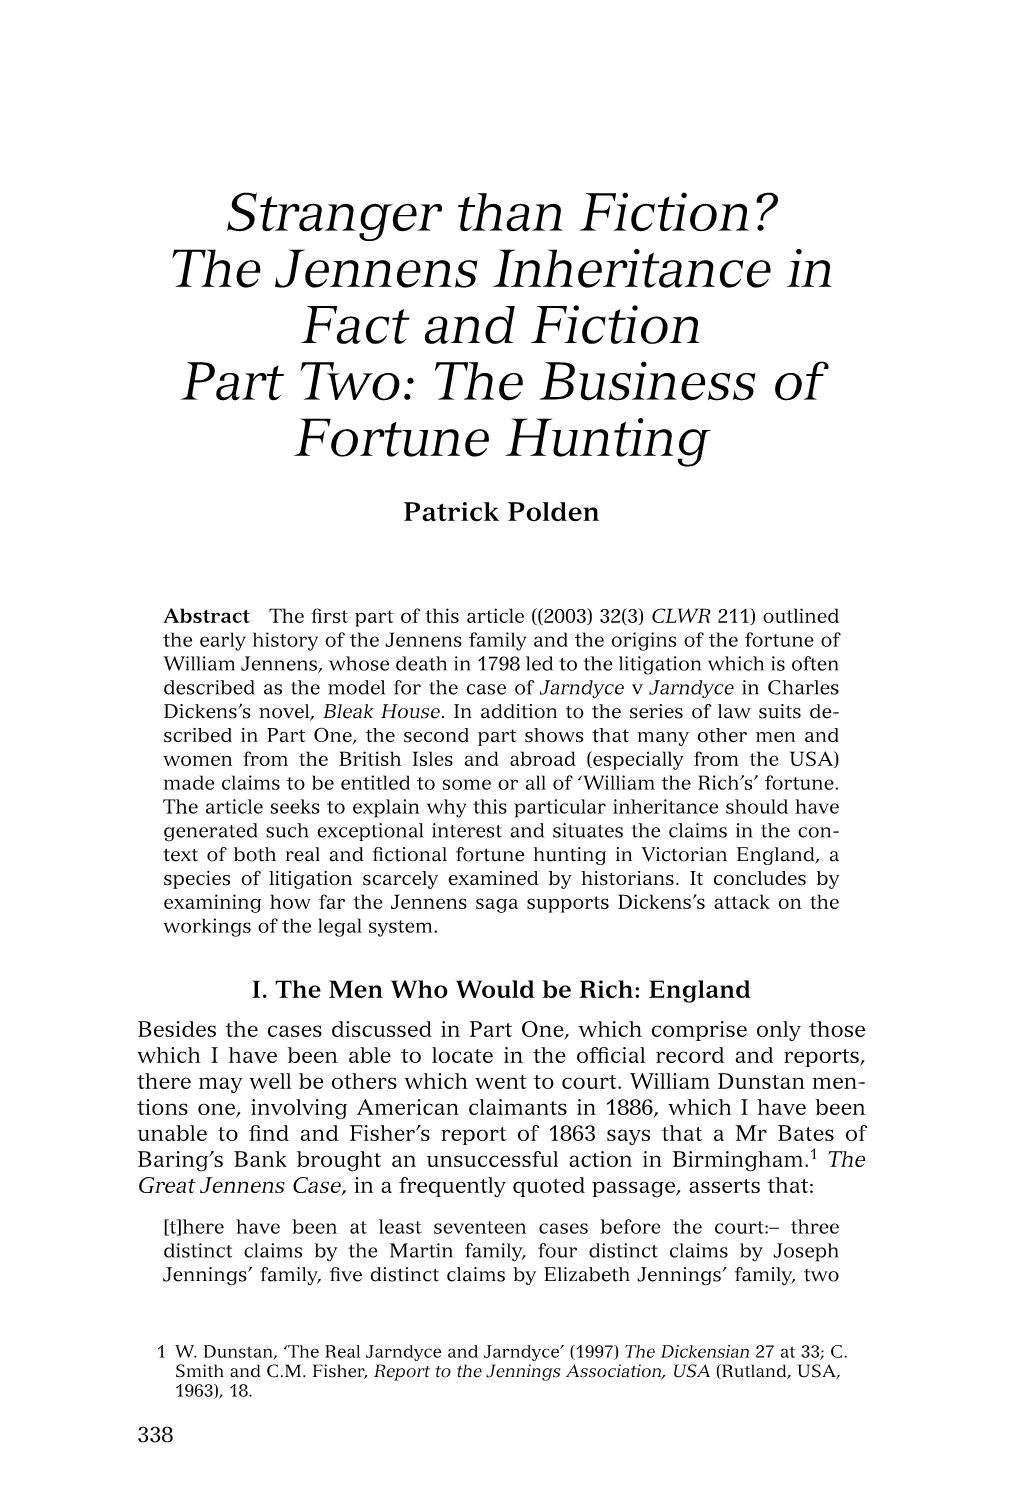 Stranger Than Fiction? the Jennens Inheritance in Fact and Fiction Part Two: the Business of Fortune Hunting